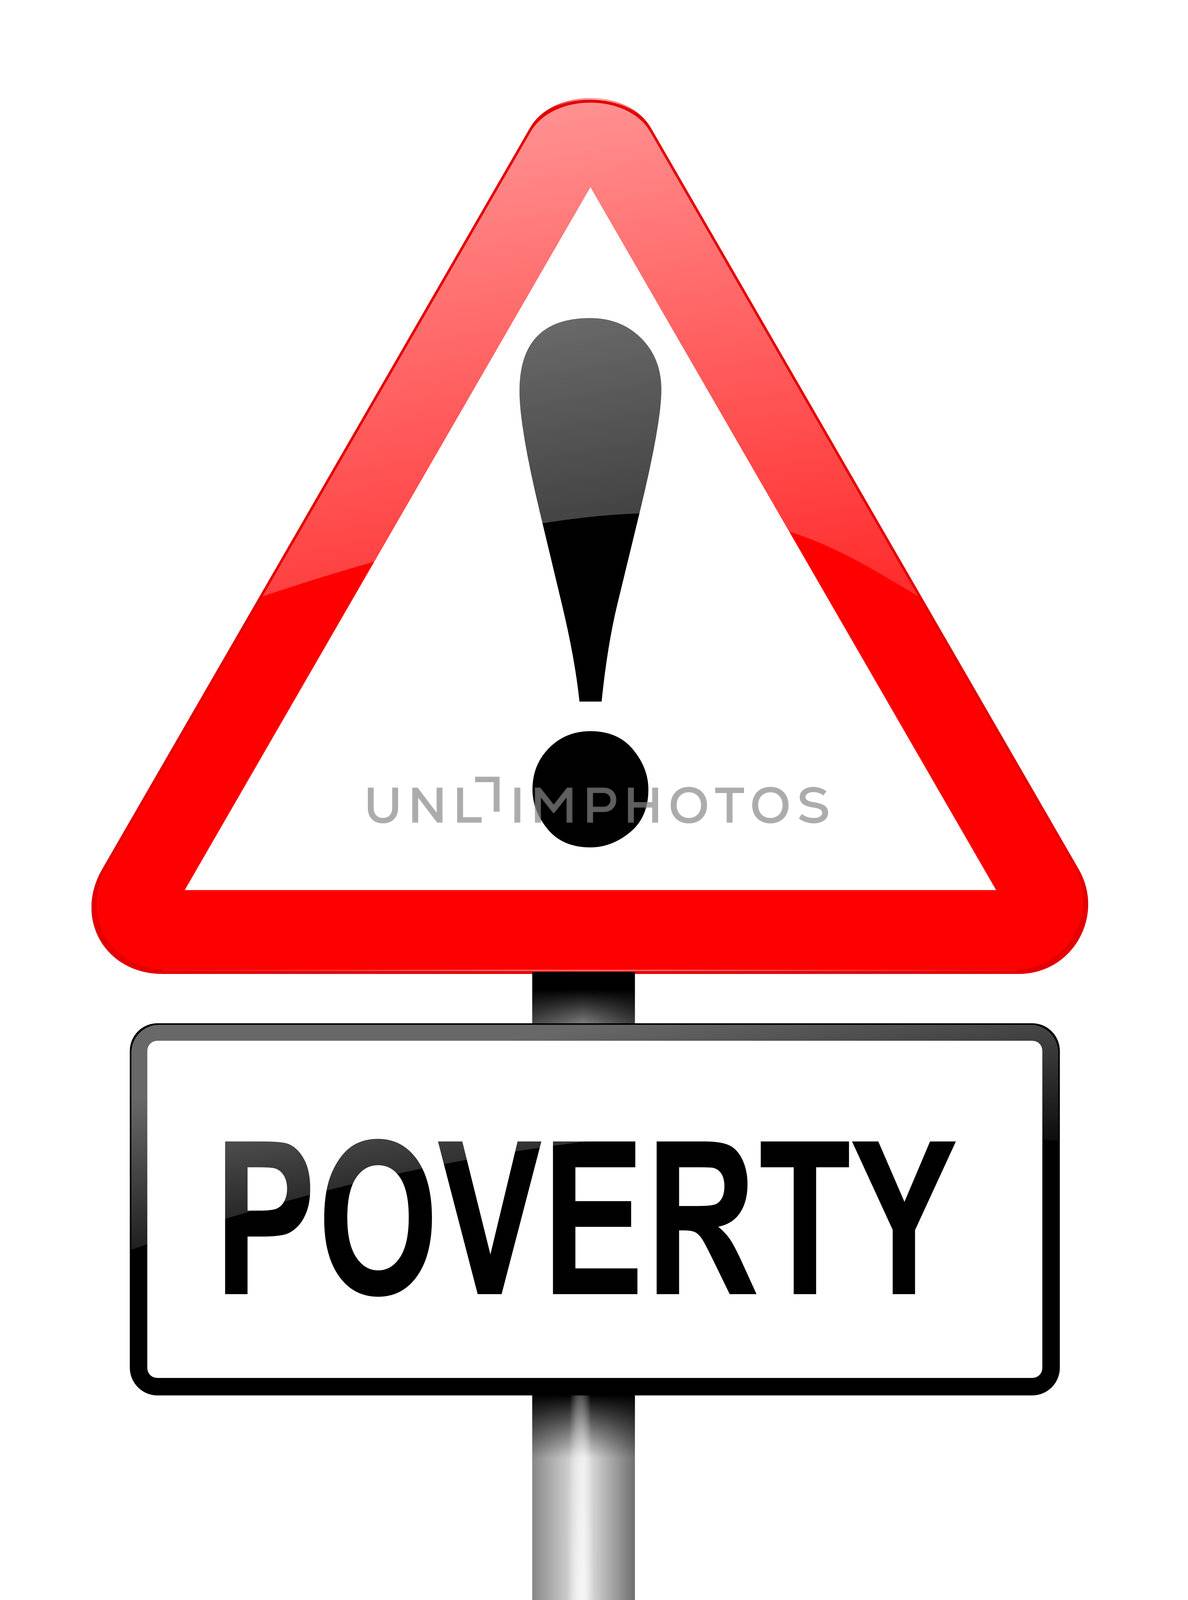 Poverty warning. by 72soul